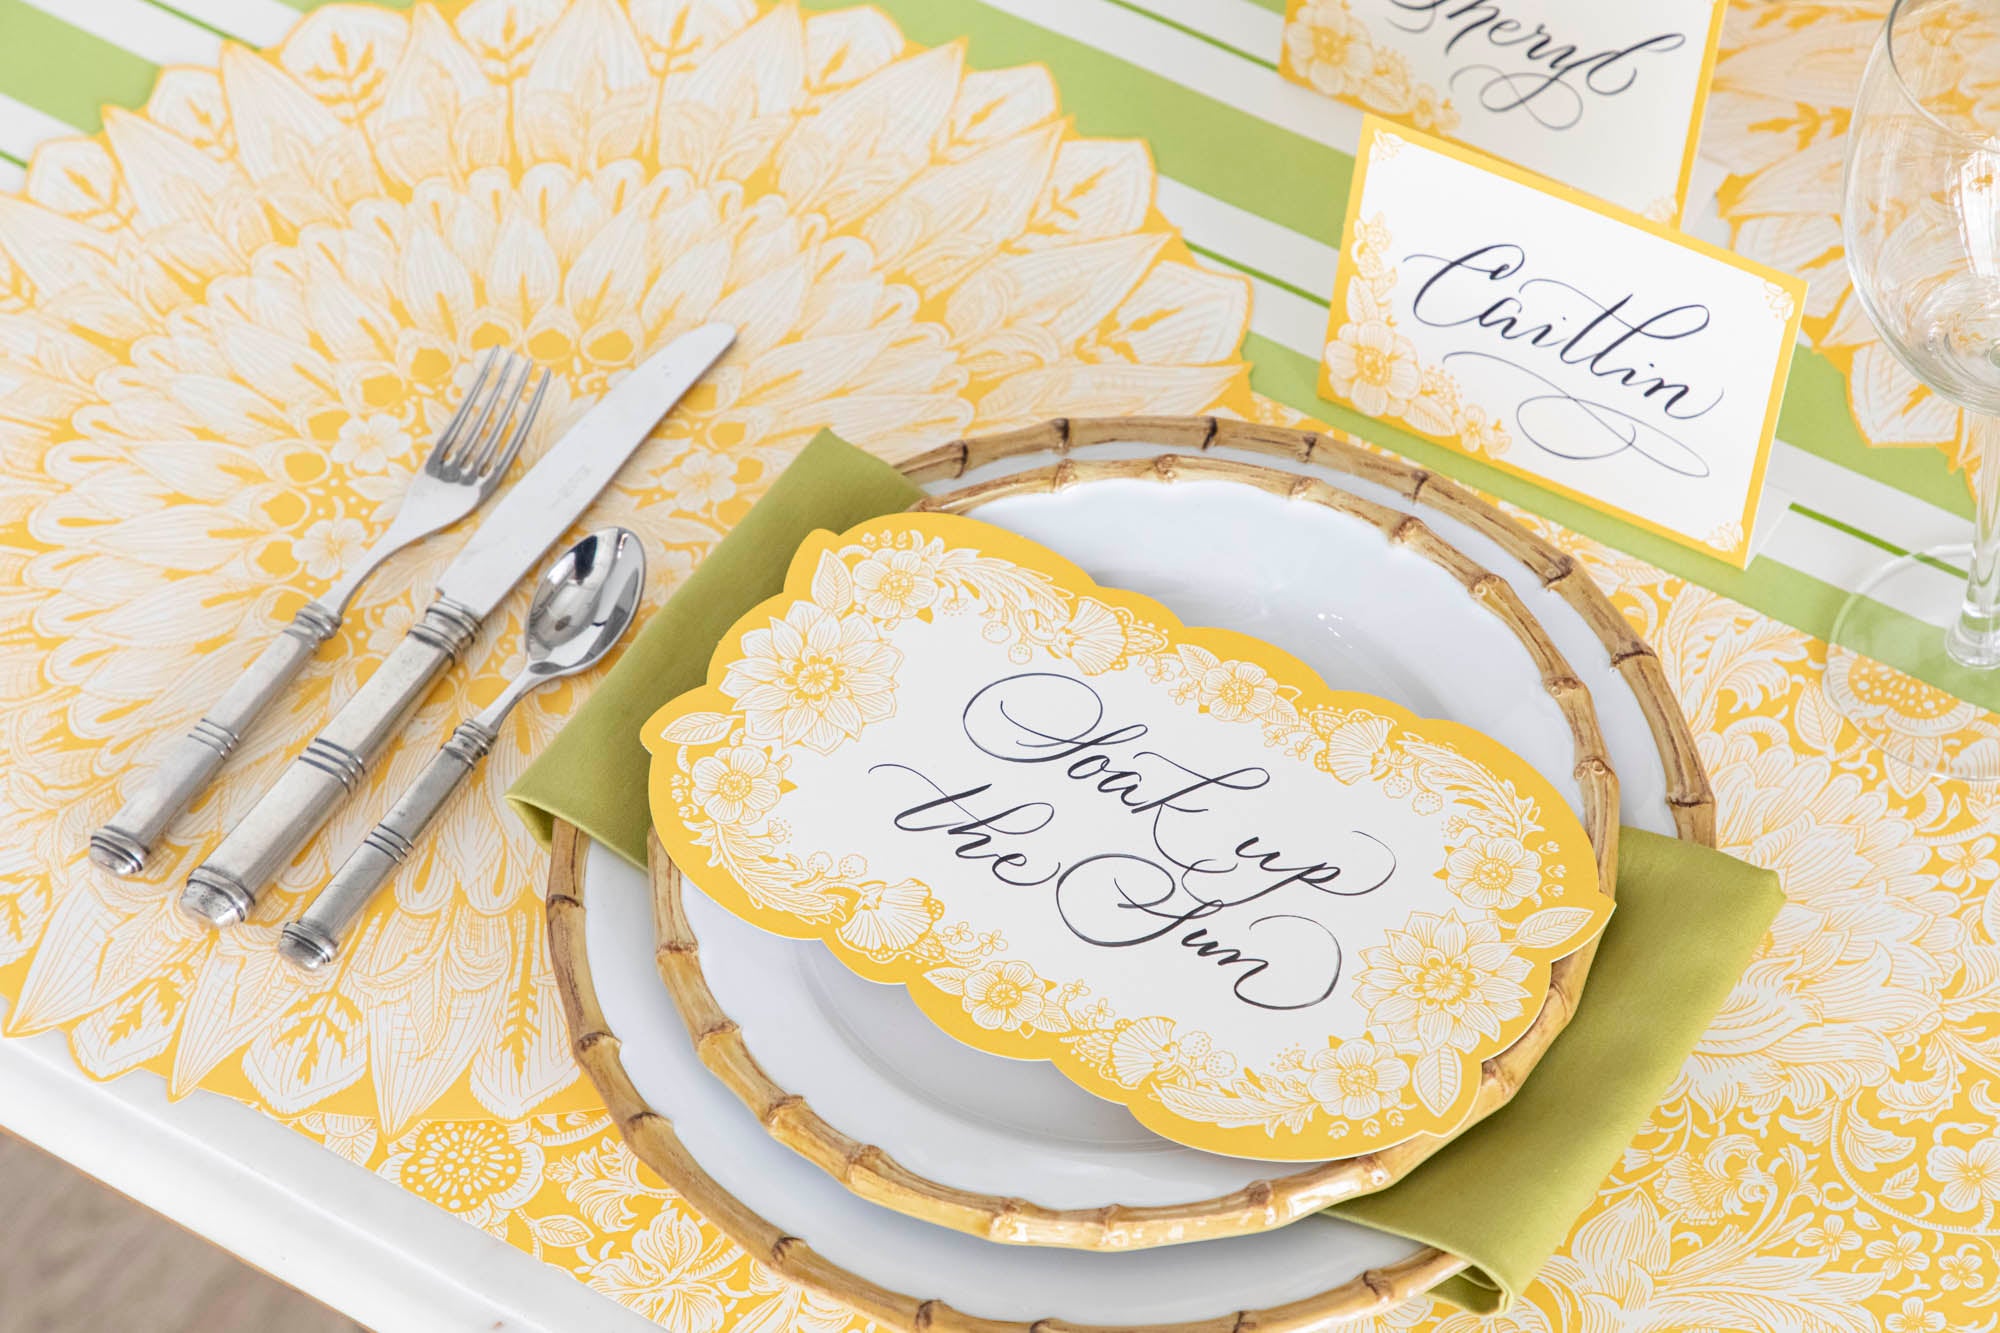 A Spring Blooms Place Card by Hester &amp; Cook with hand-painted florals on a white tablecloth.